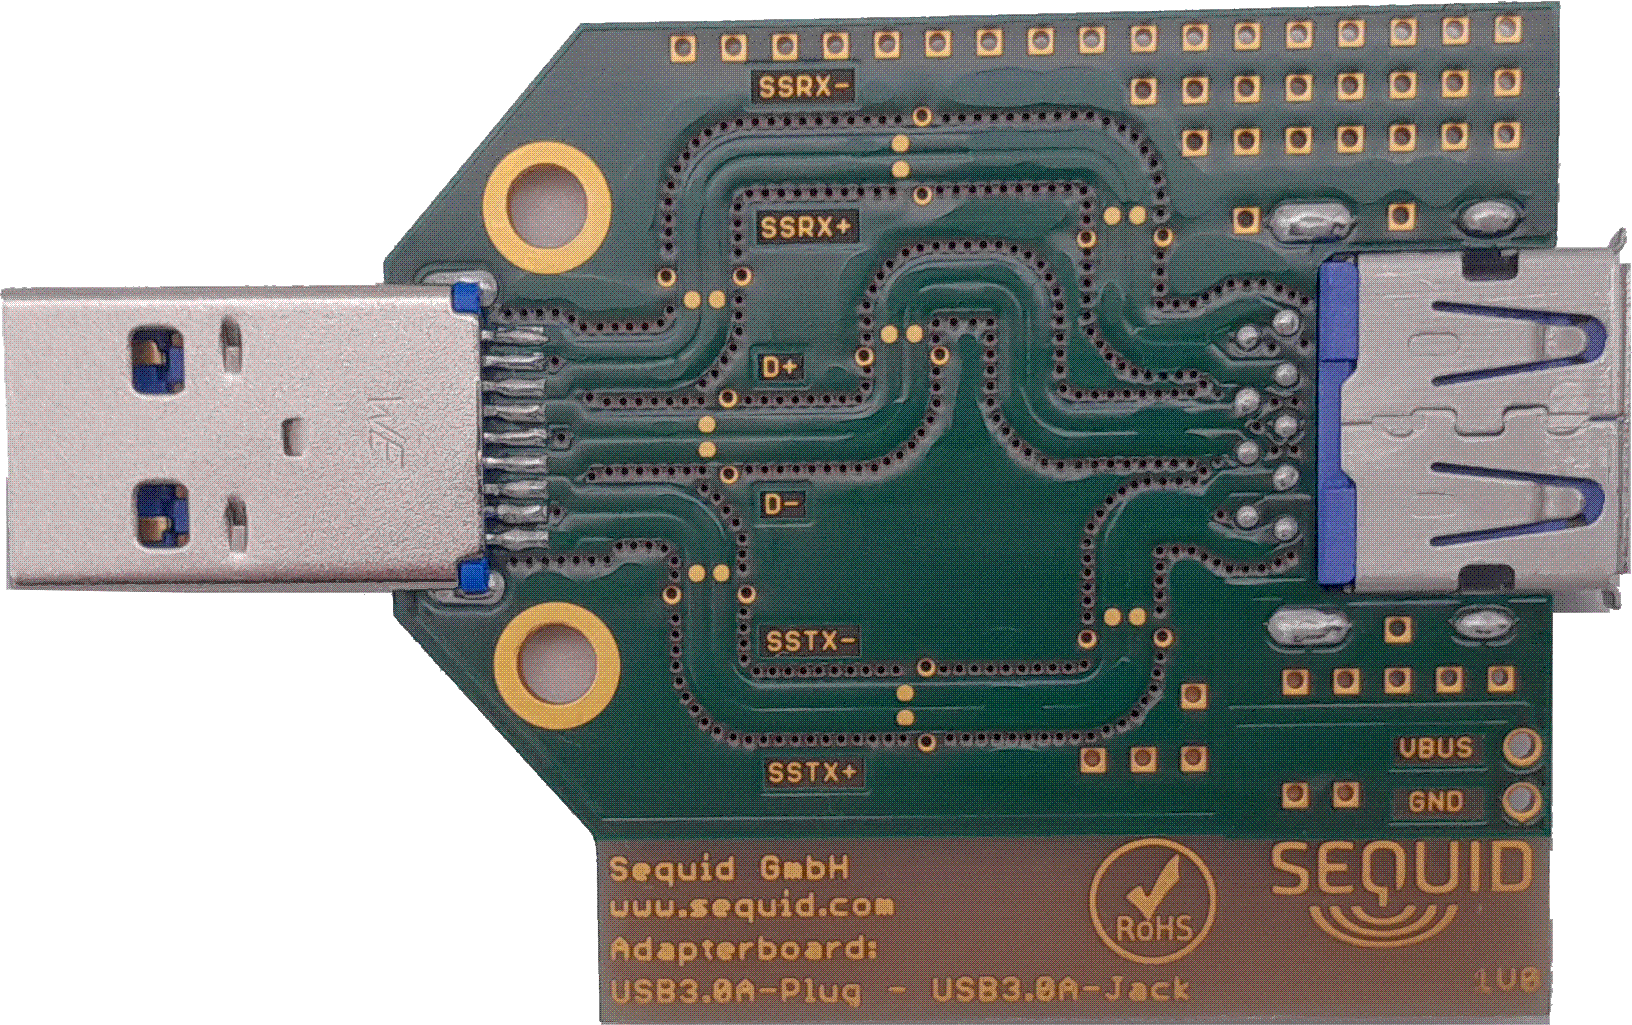 USB-3.0 Plug to Jack Adapter featuring a wave impedance of 90Ω and various solder resist openenings for attaching probe